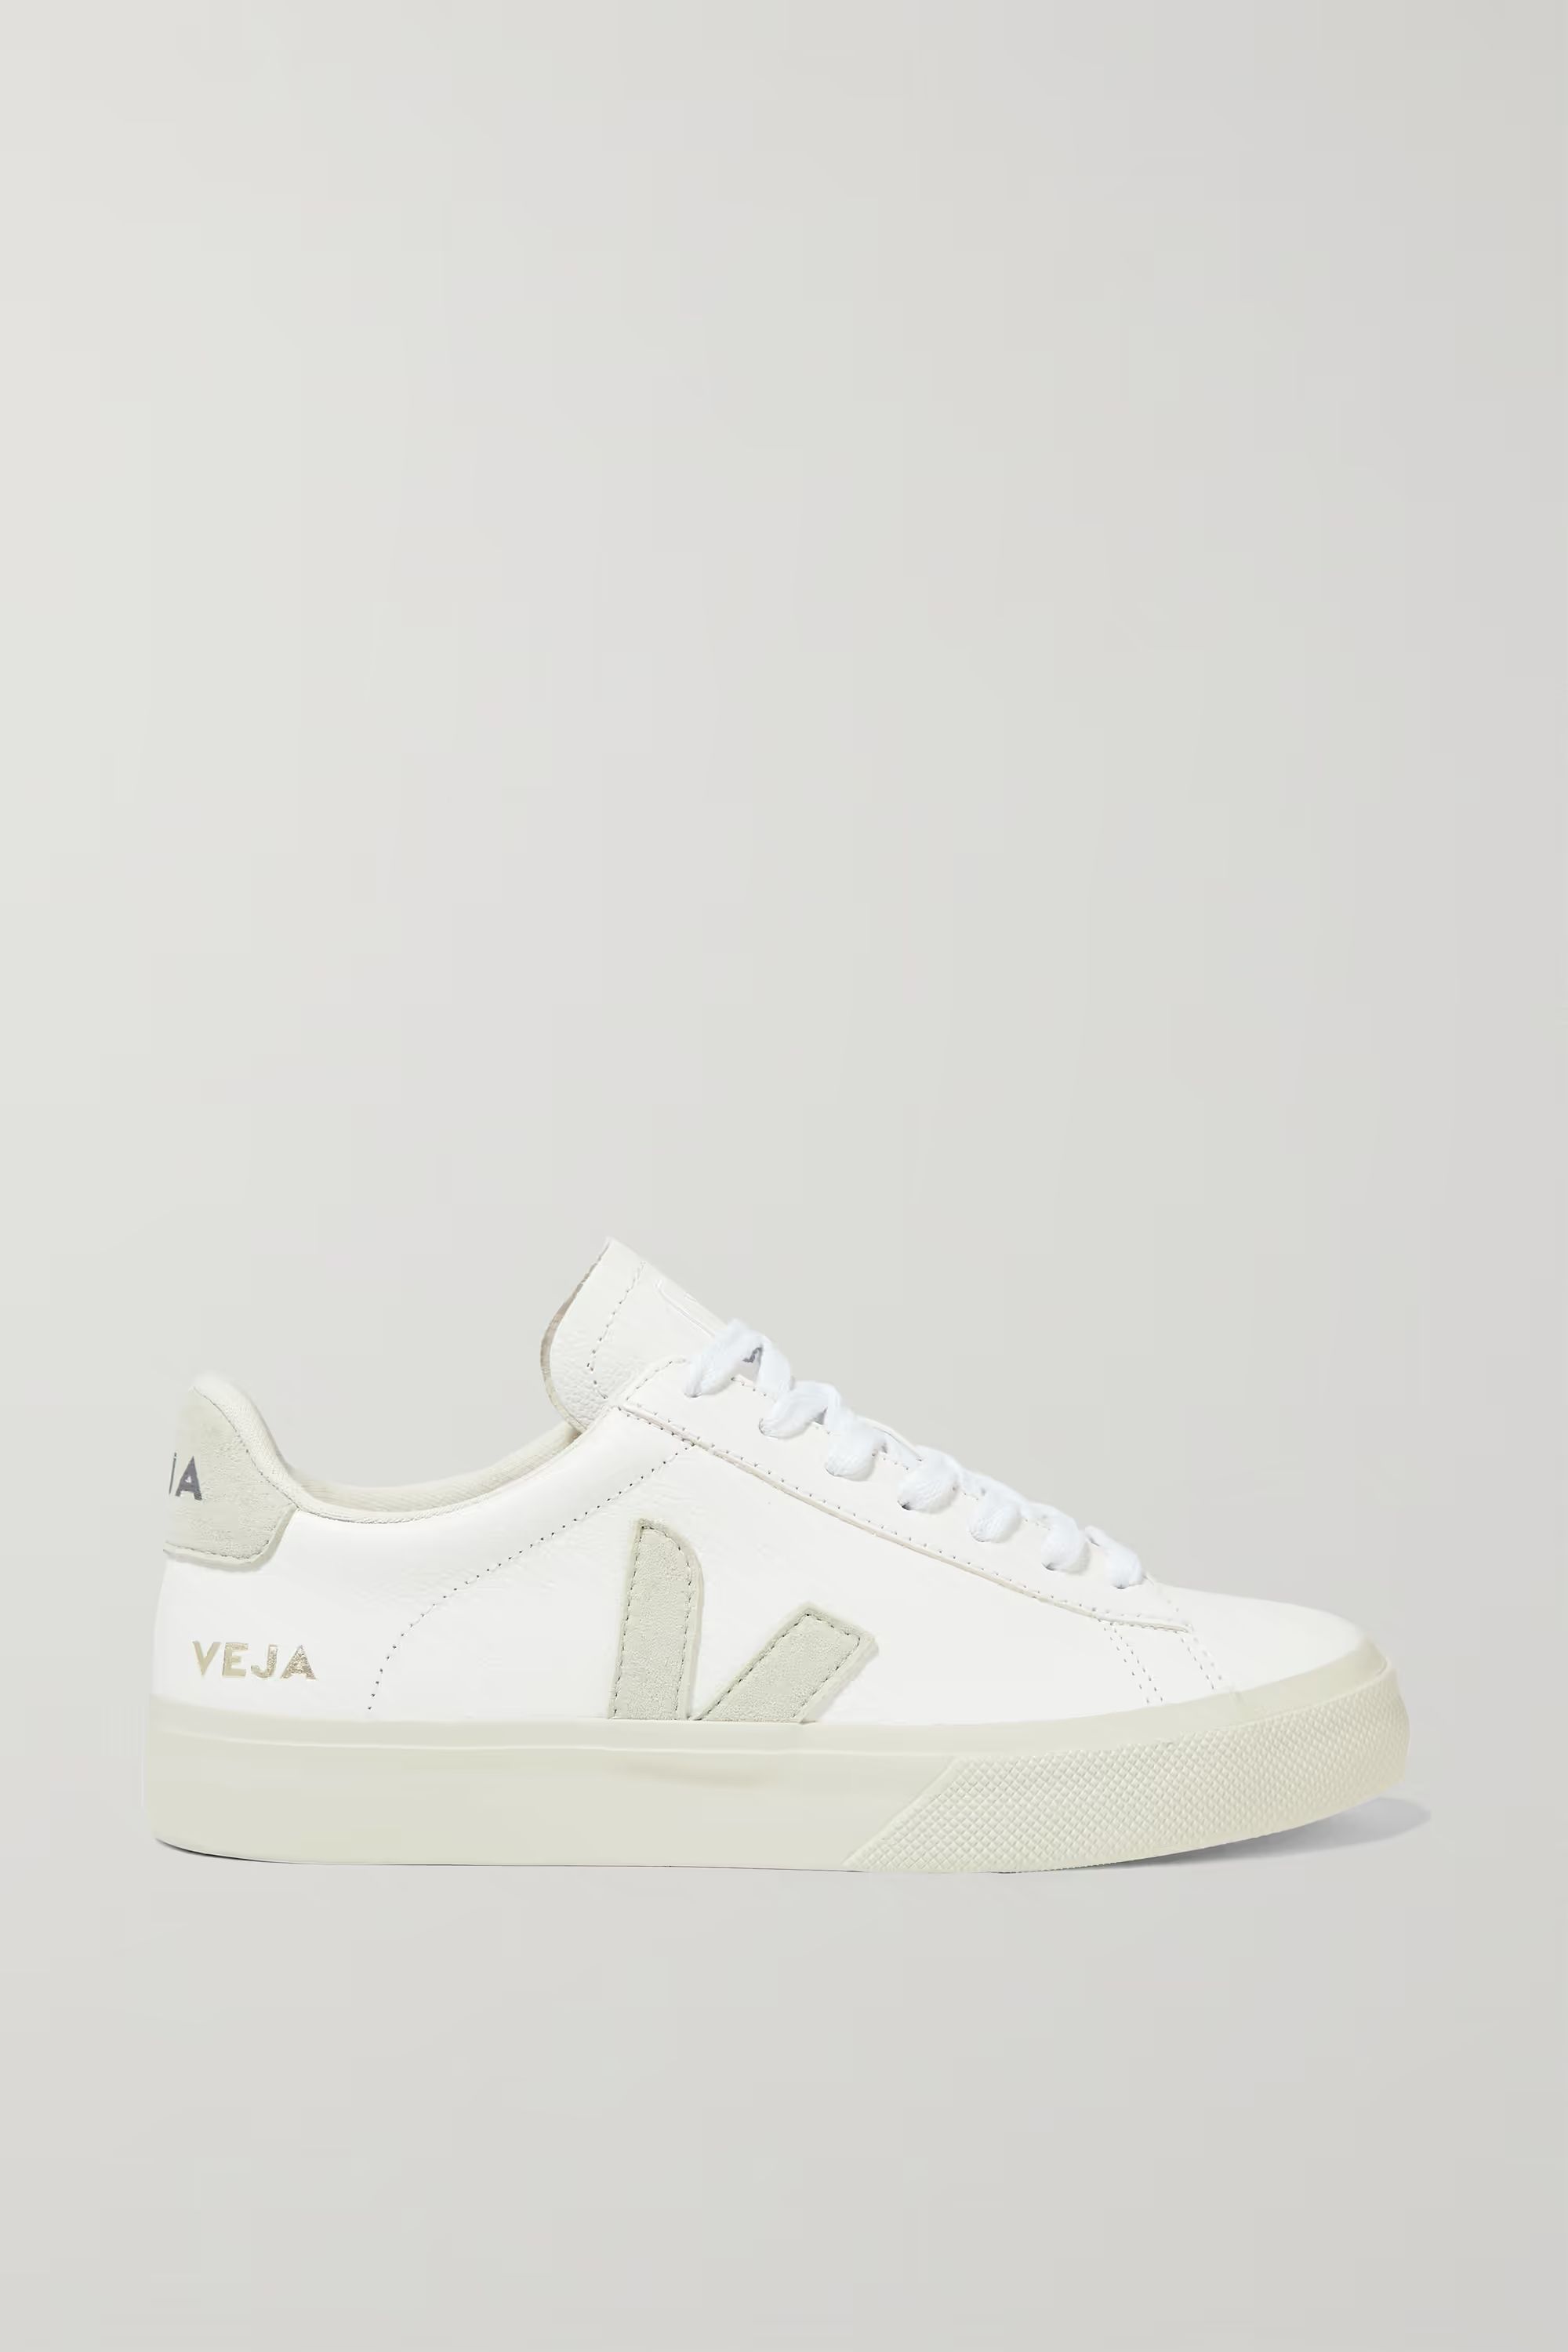 VEJA+ NET SUSTAIN Campo leather and suede sneakers | NET-A-PORTER (US)